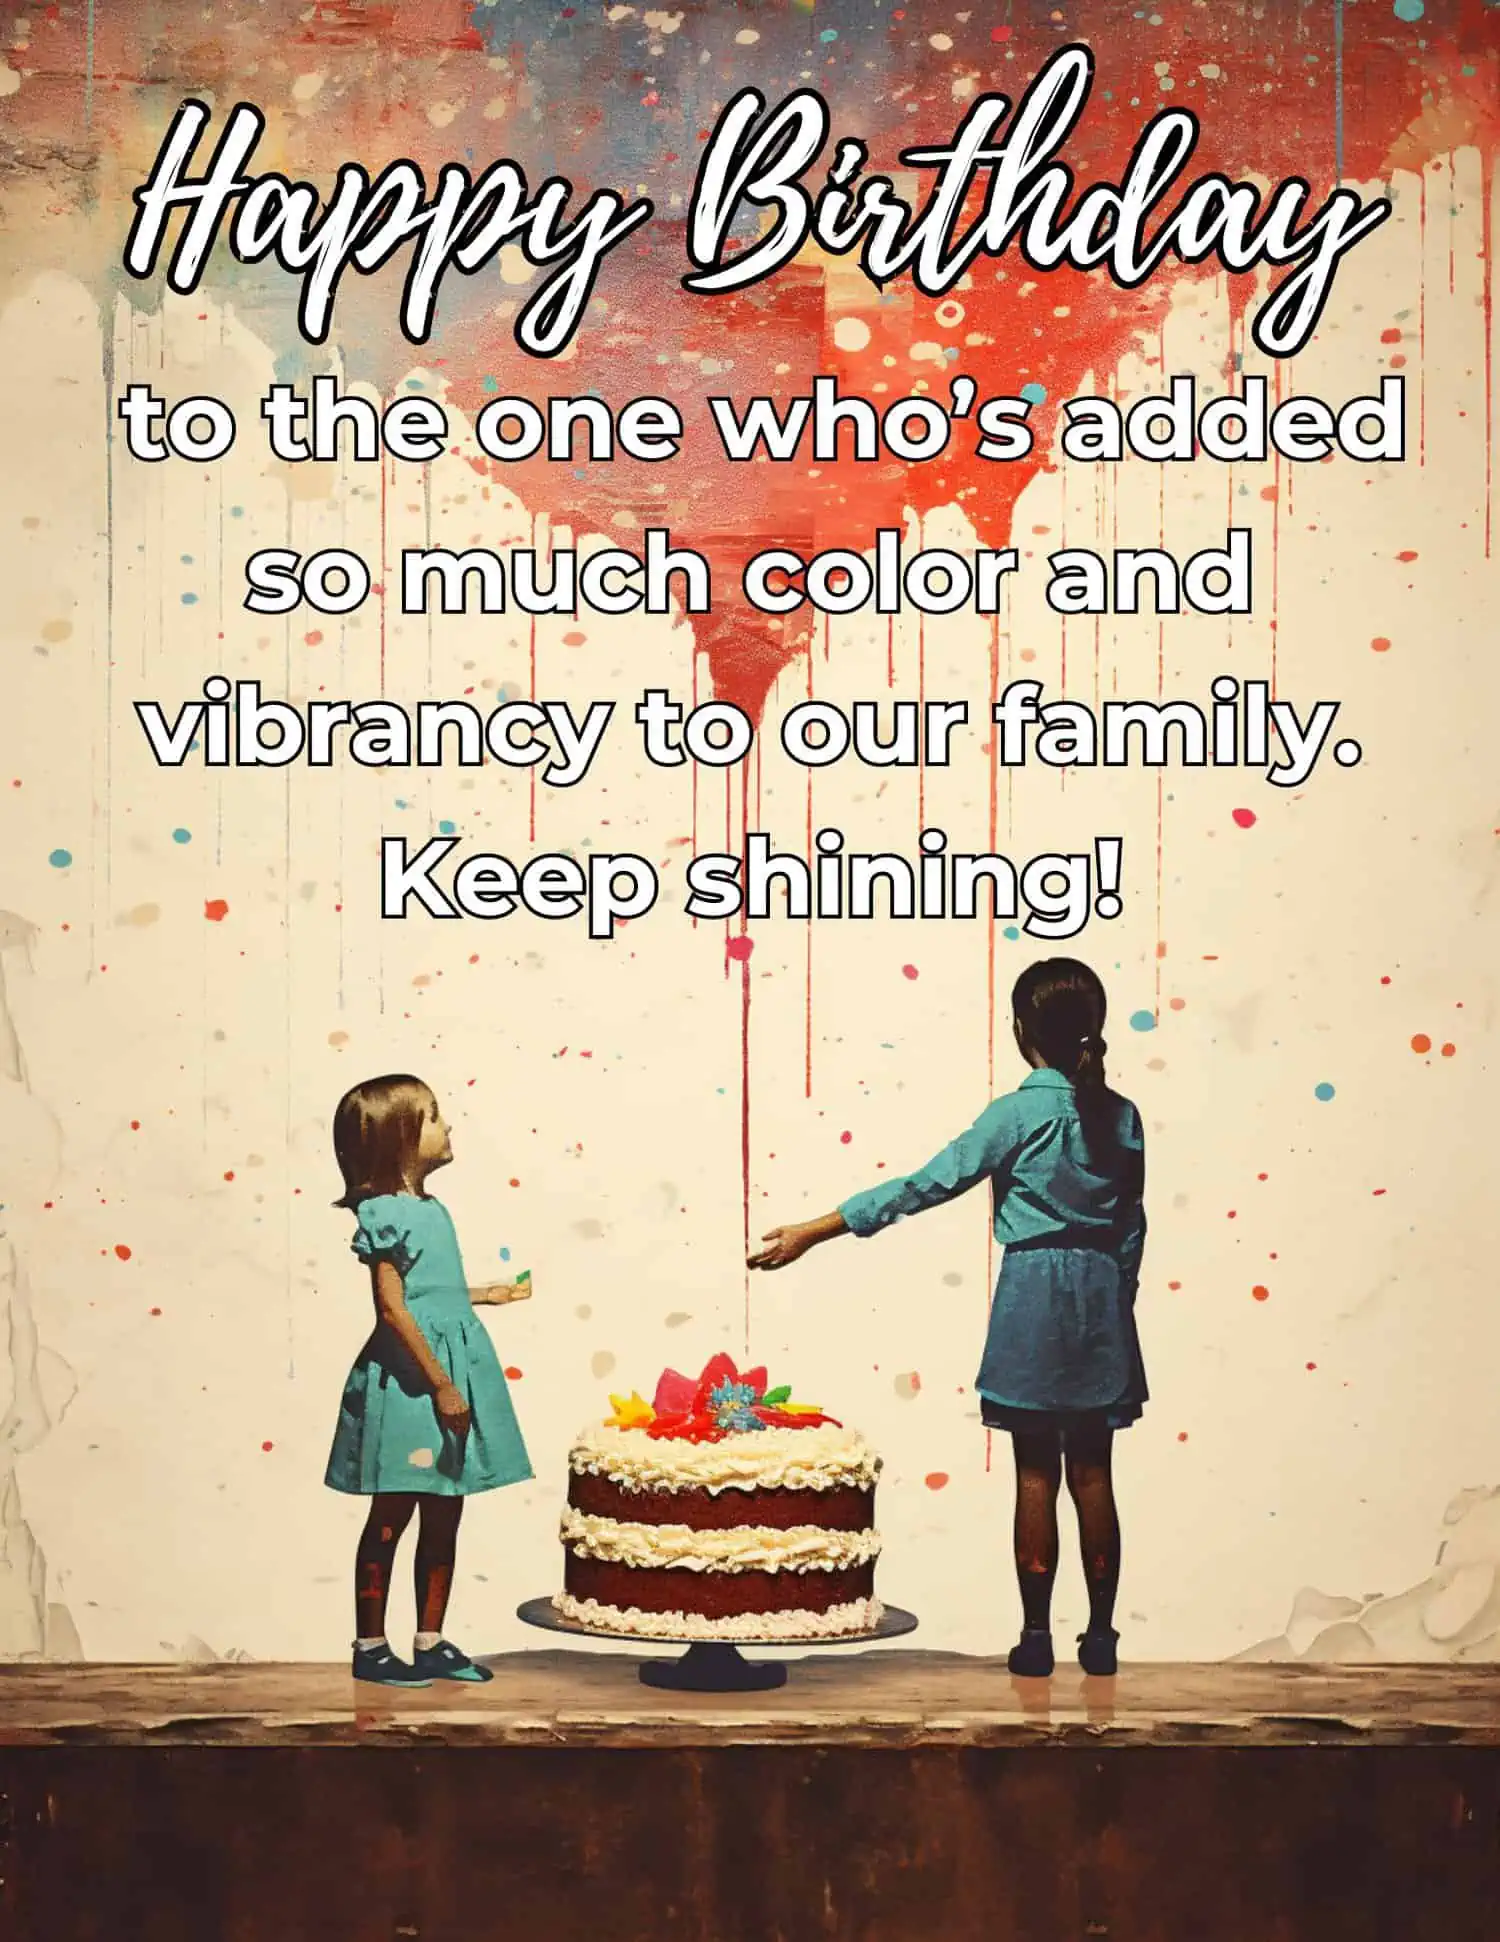 A series of endearing and sweet birthday wishes dedicated to younger sisters.